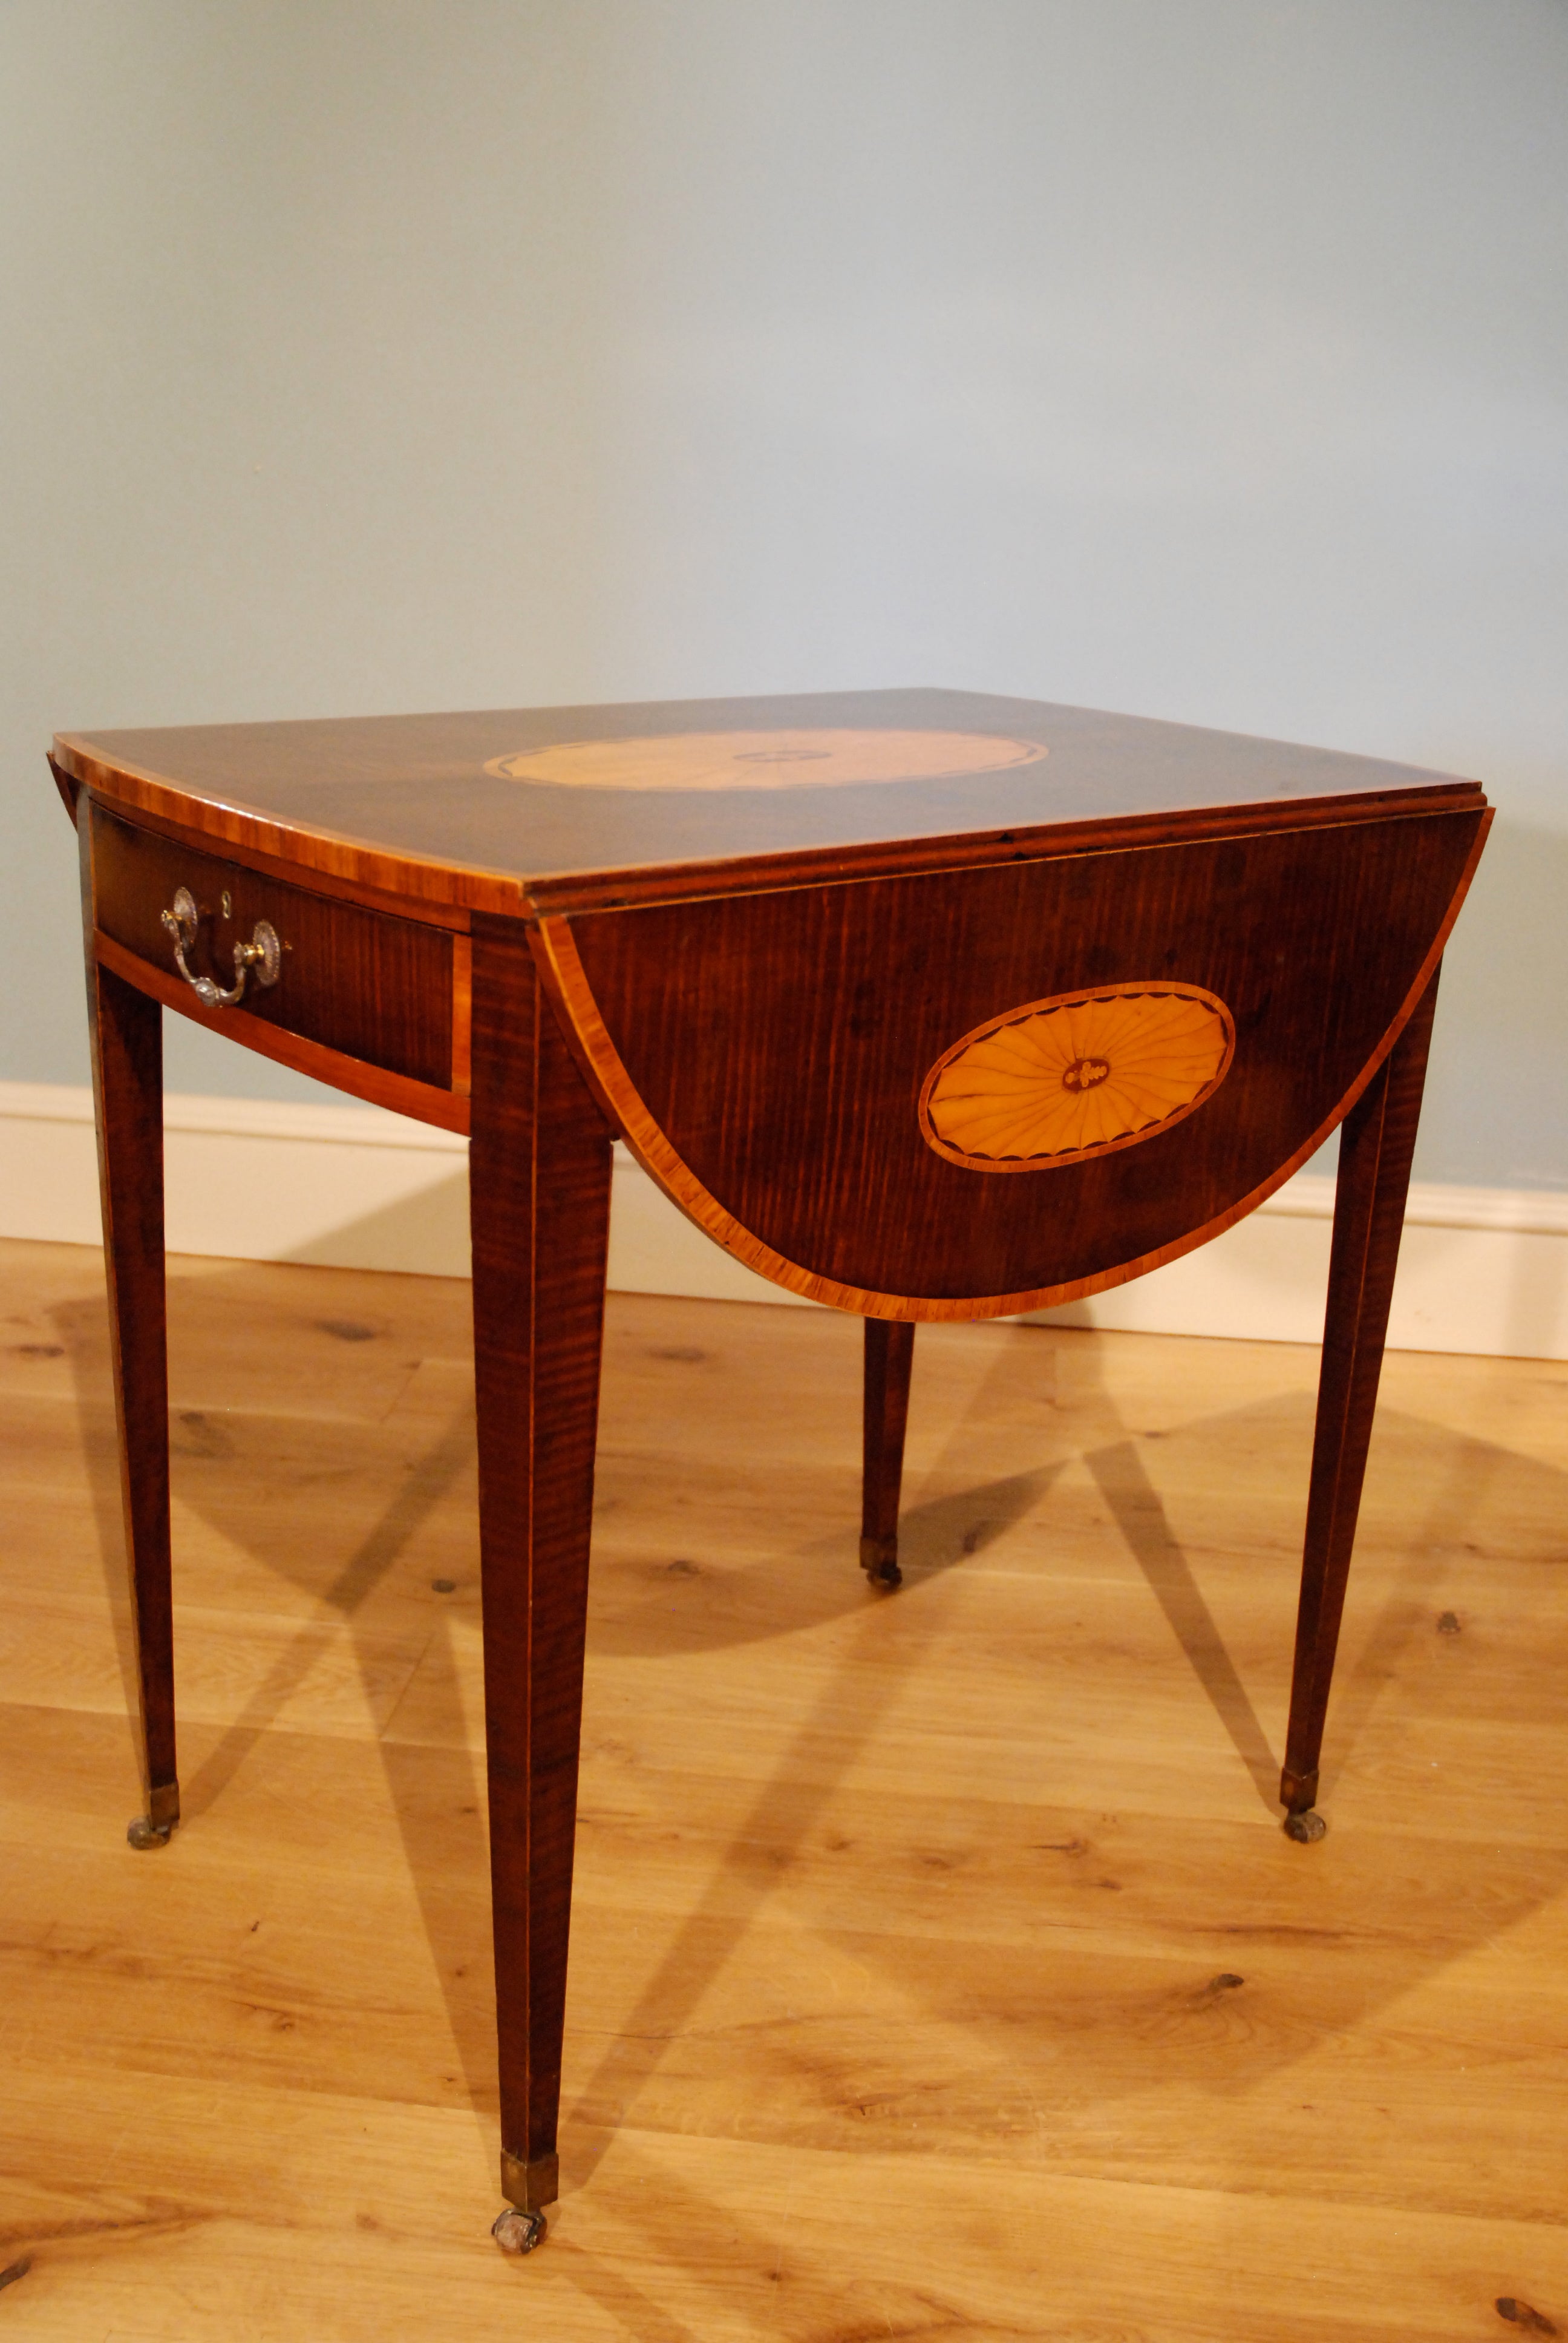 A Late 18th Century Veneered And Inlaid Pembroke Table. Circa 1790.